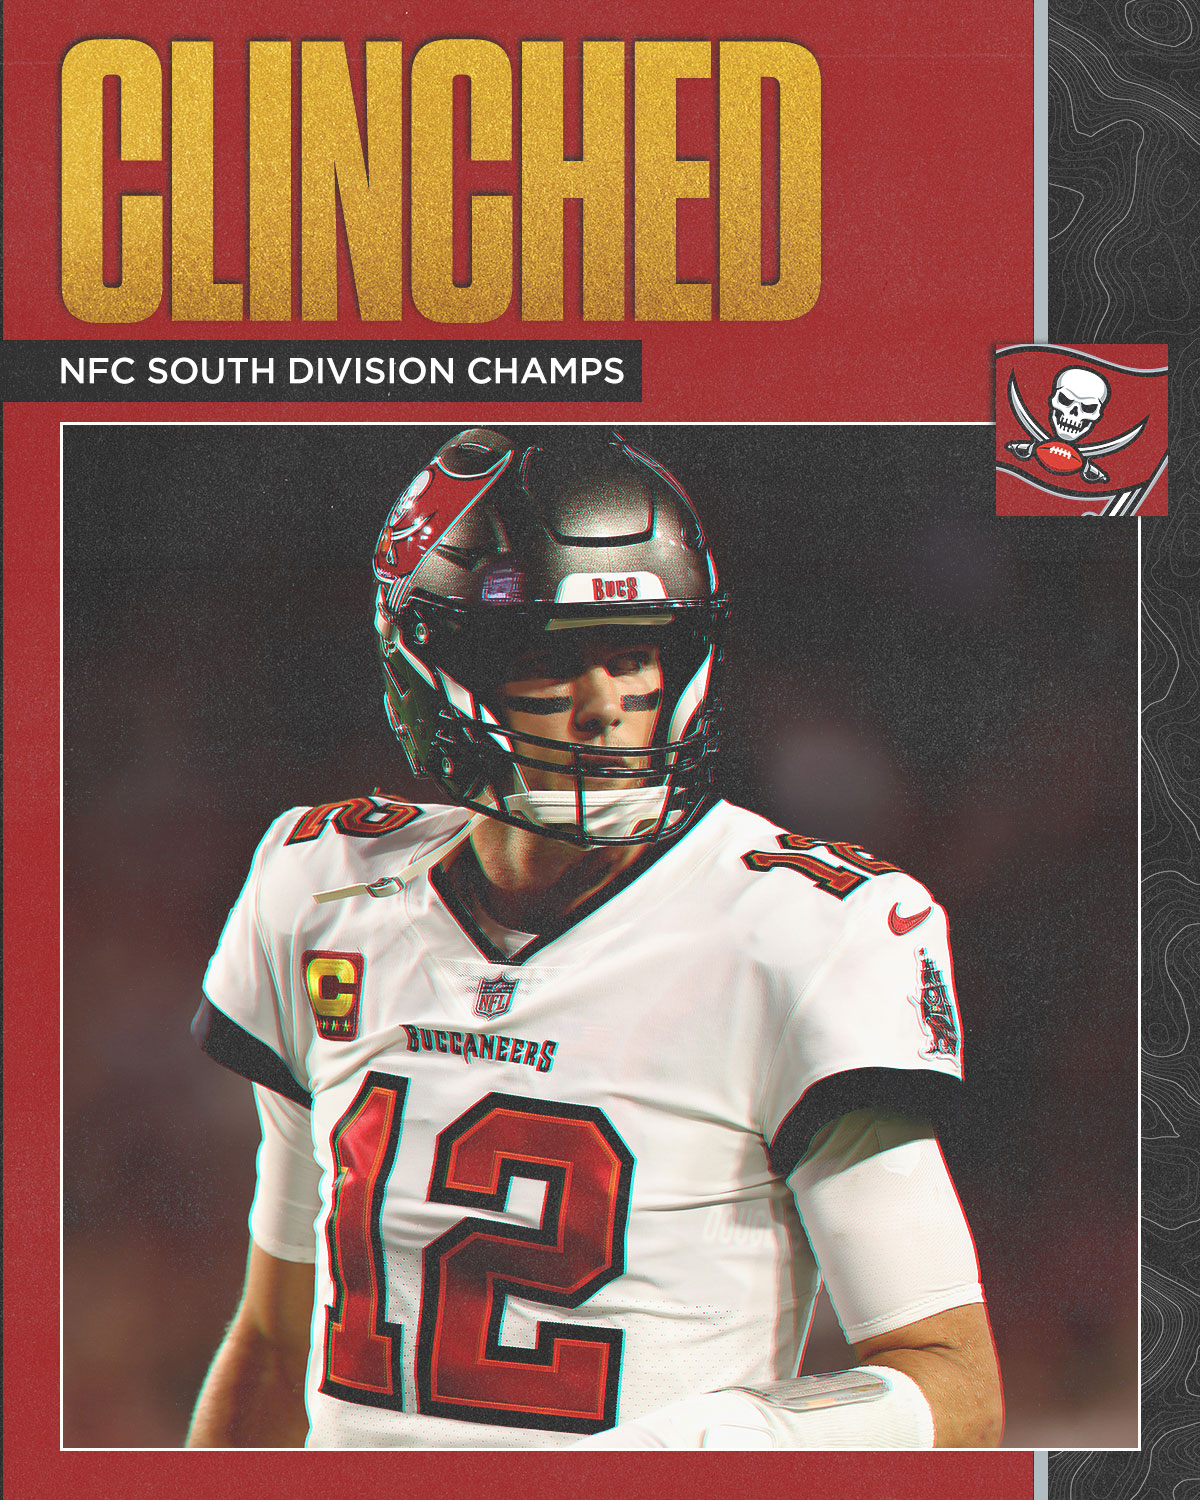 nfc south division champs